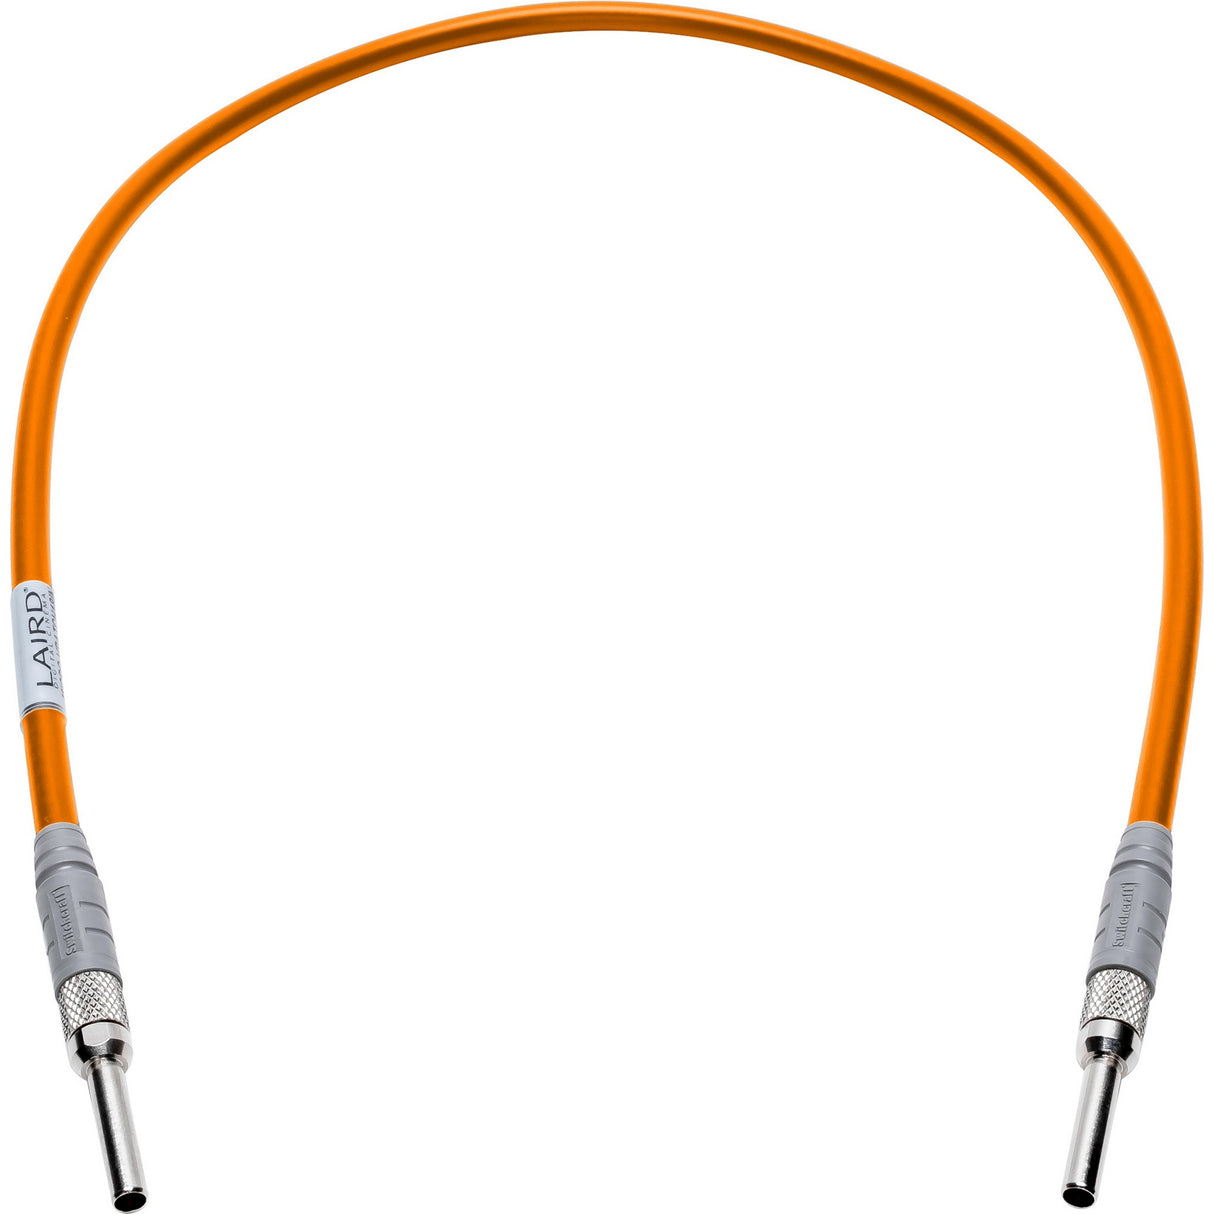 Laird MICRO-VPATCH-003OE 12G-SDI Micro Video Patch Cable, Orange, 3-Feet